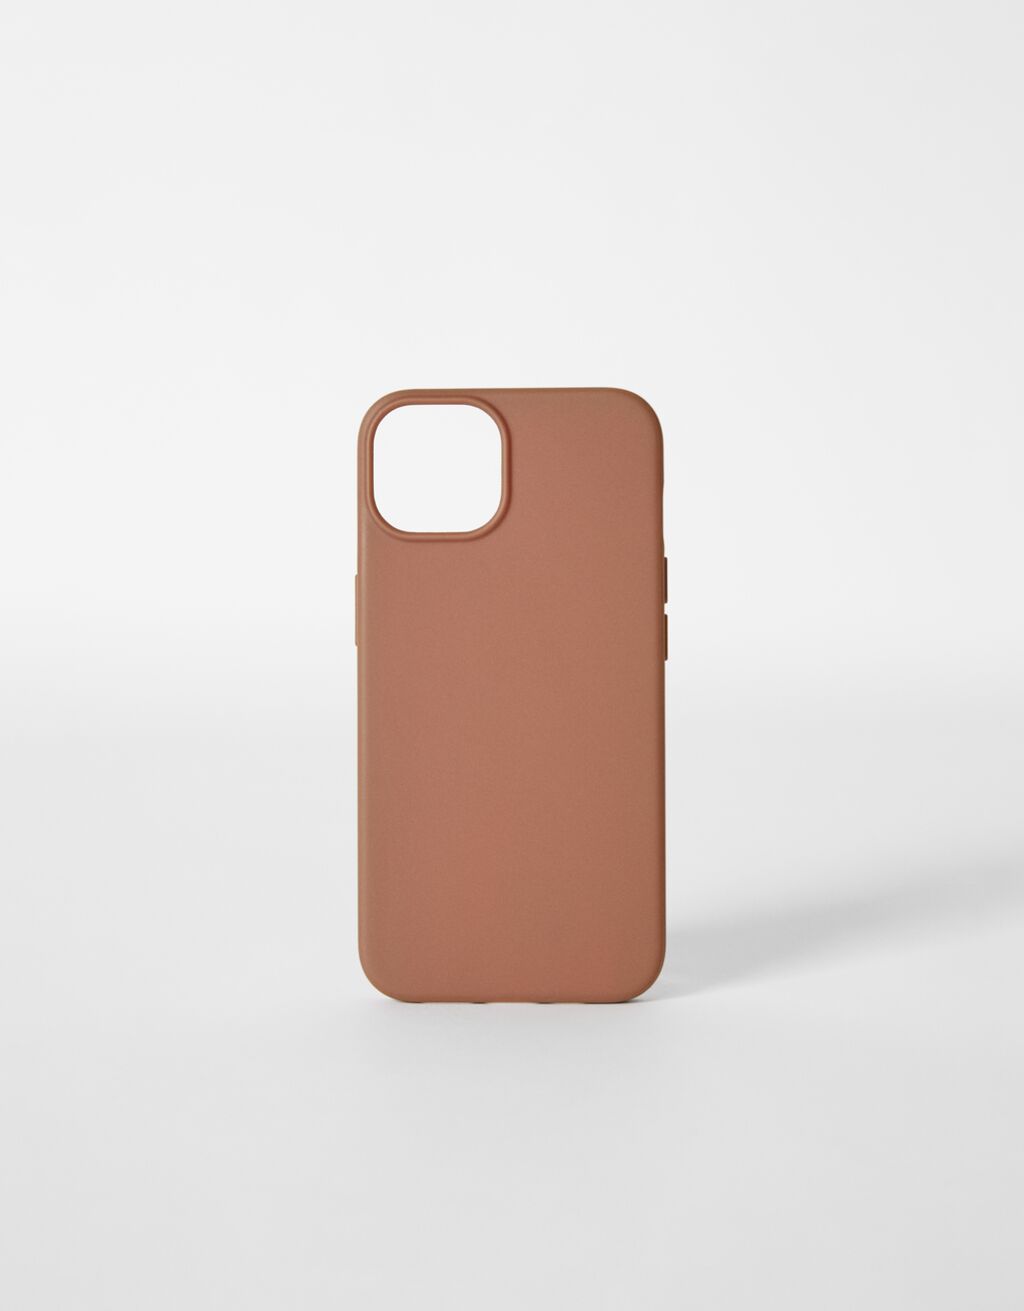 Colored iPhone case